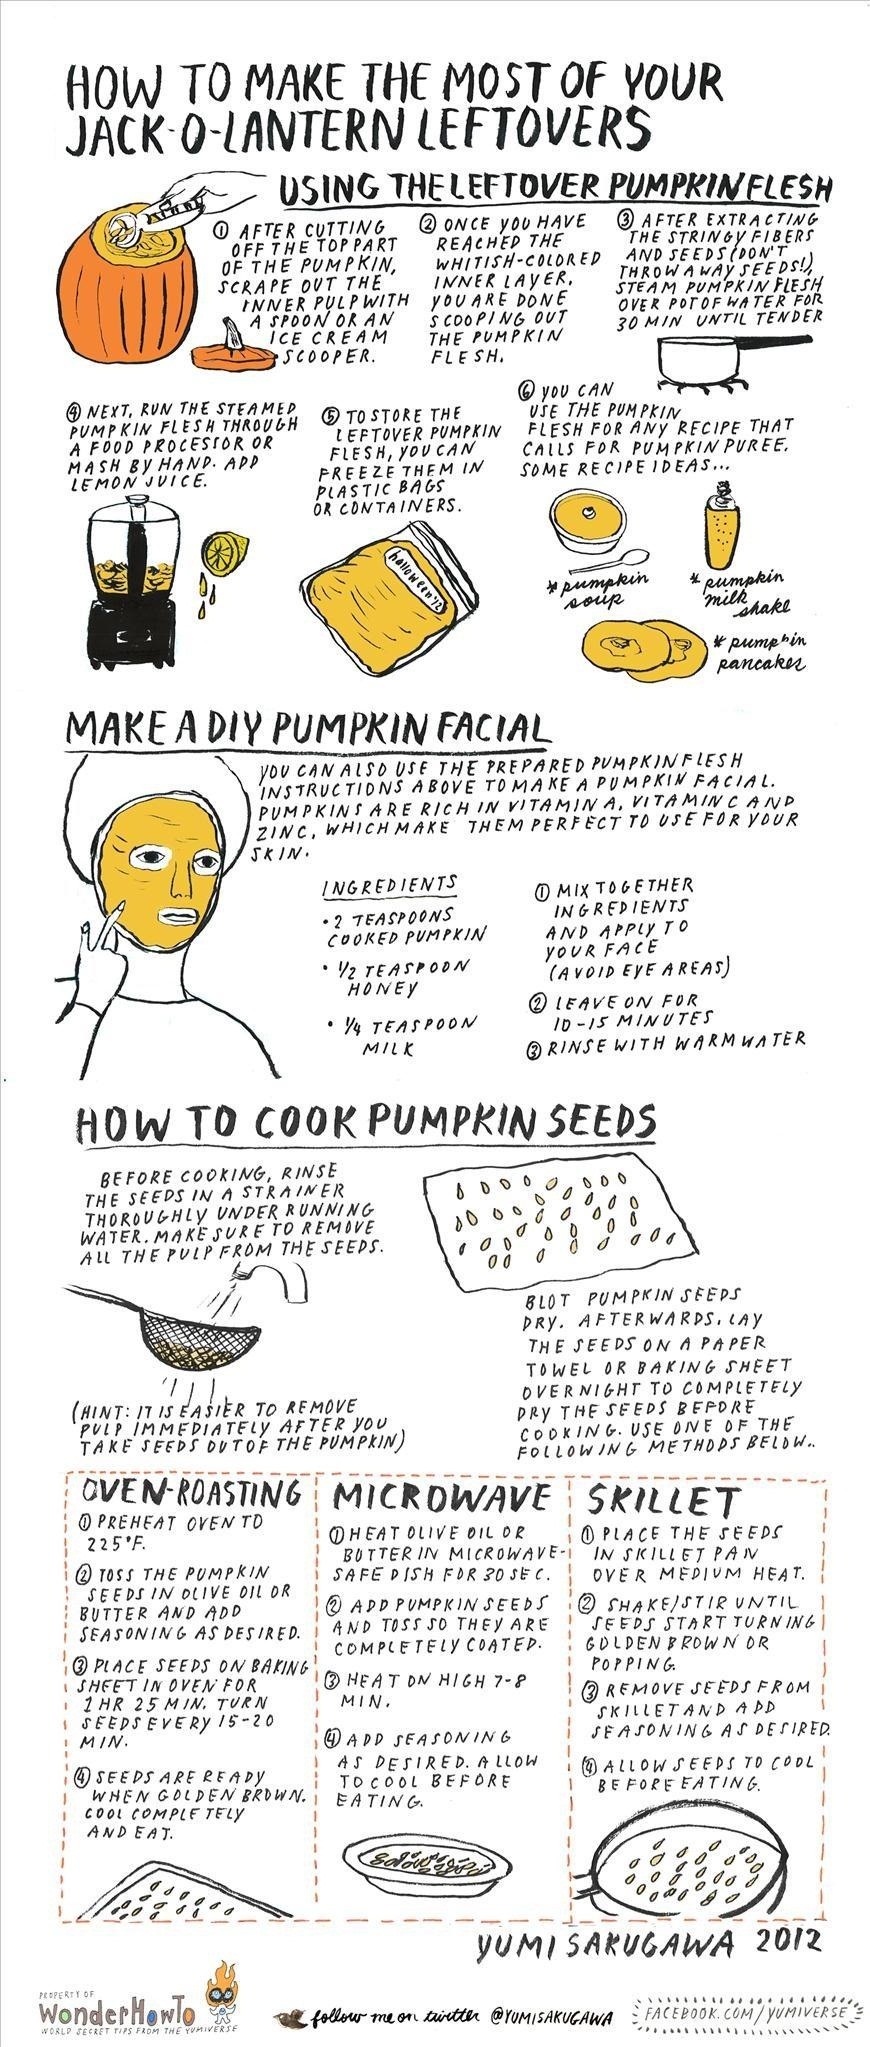 How to Make the Most of Your Jack-O'-Lantern Leftovers